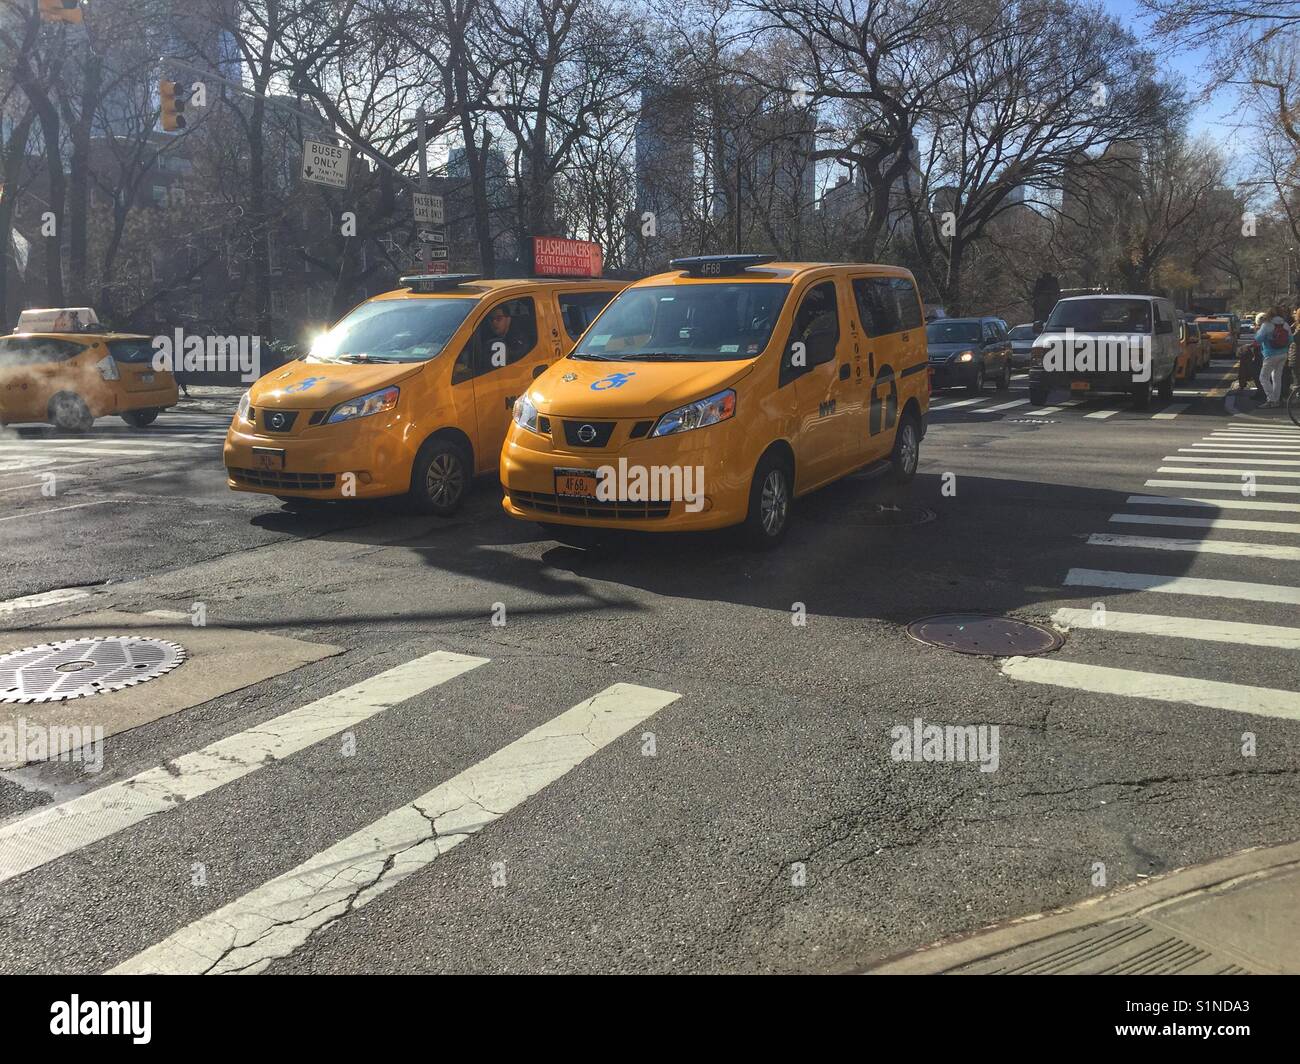 Two taxi cabs in New York City. Stock Photo